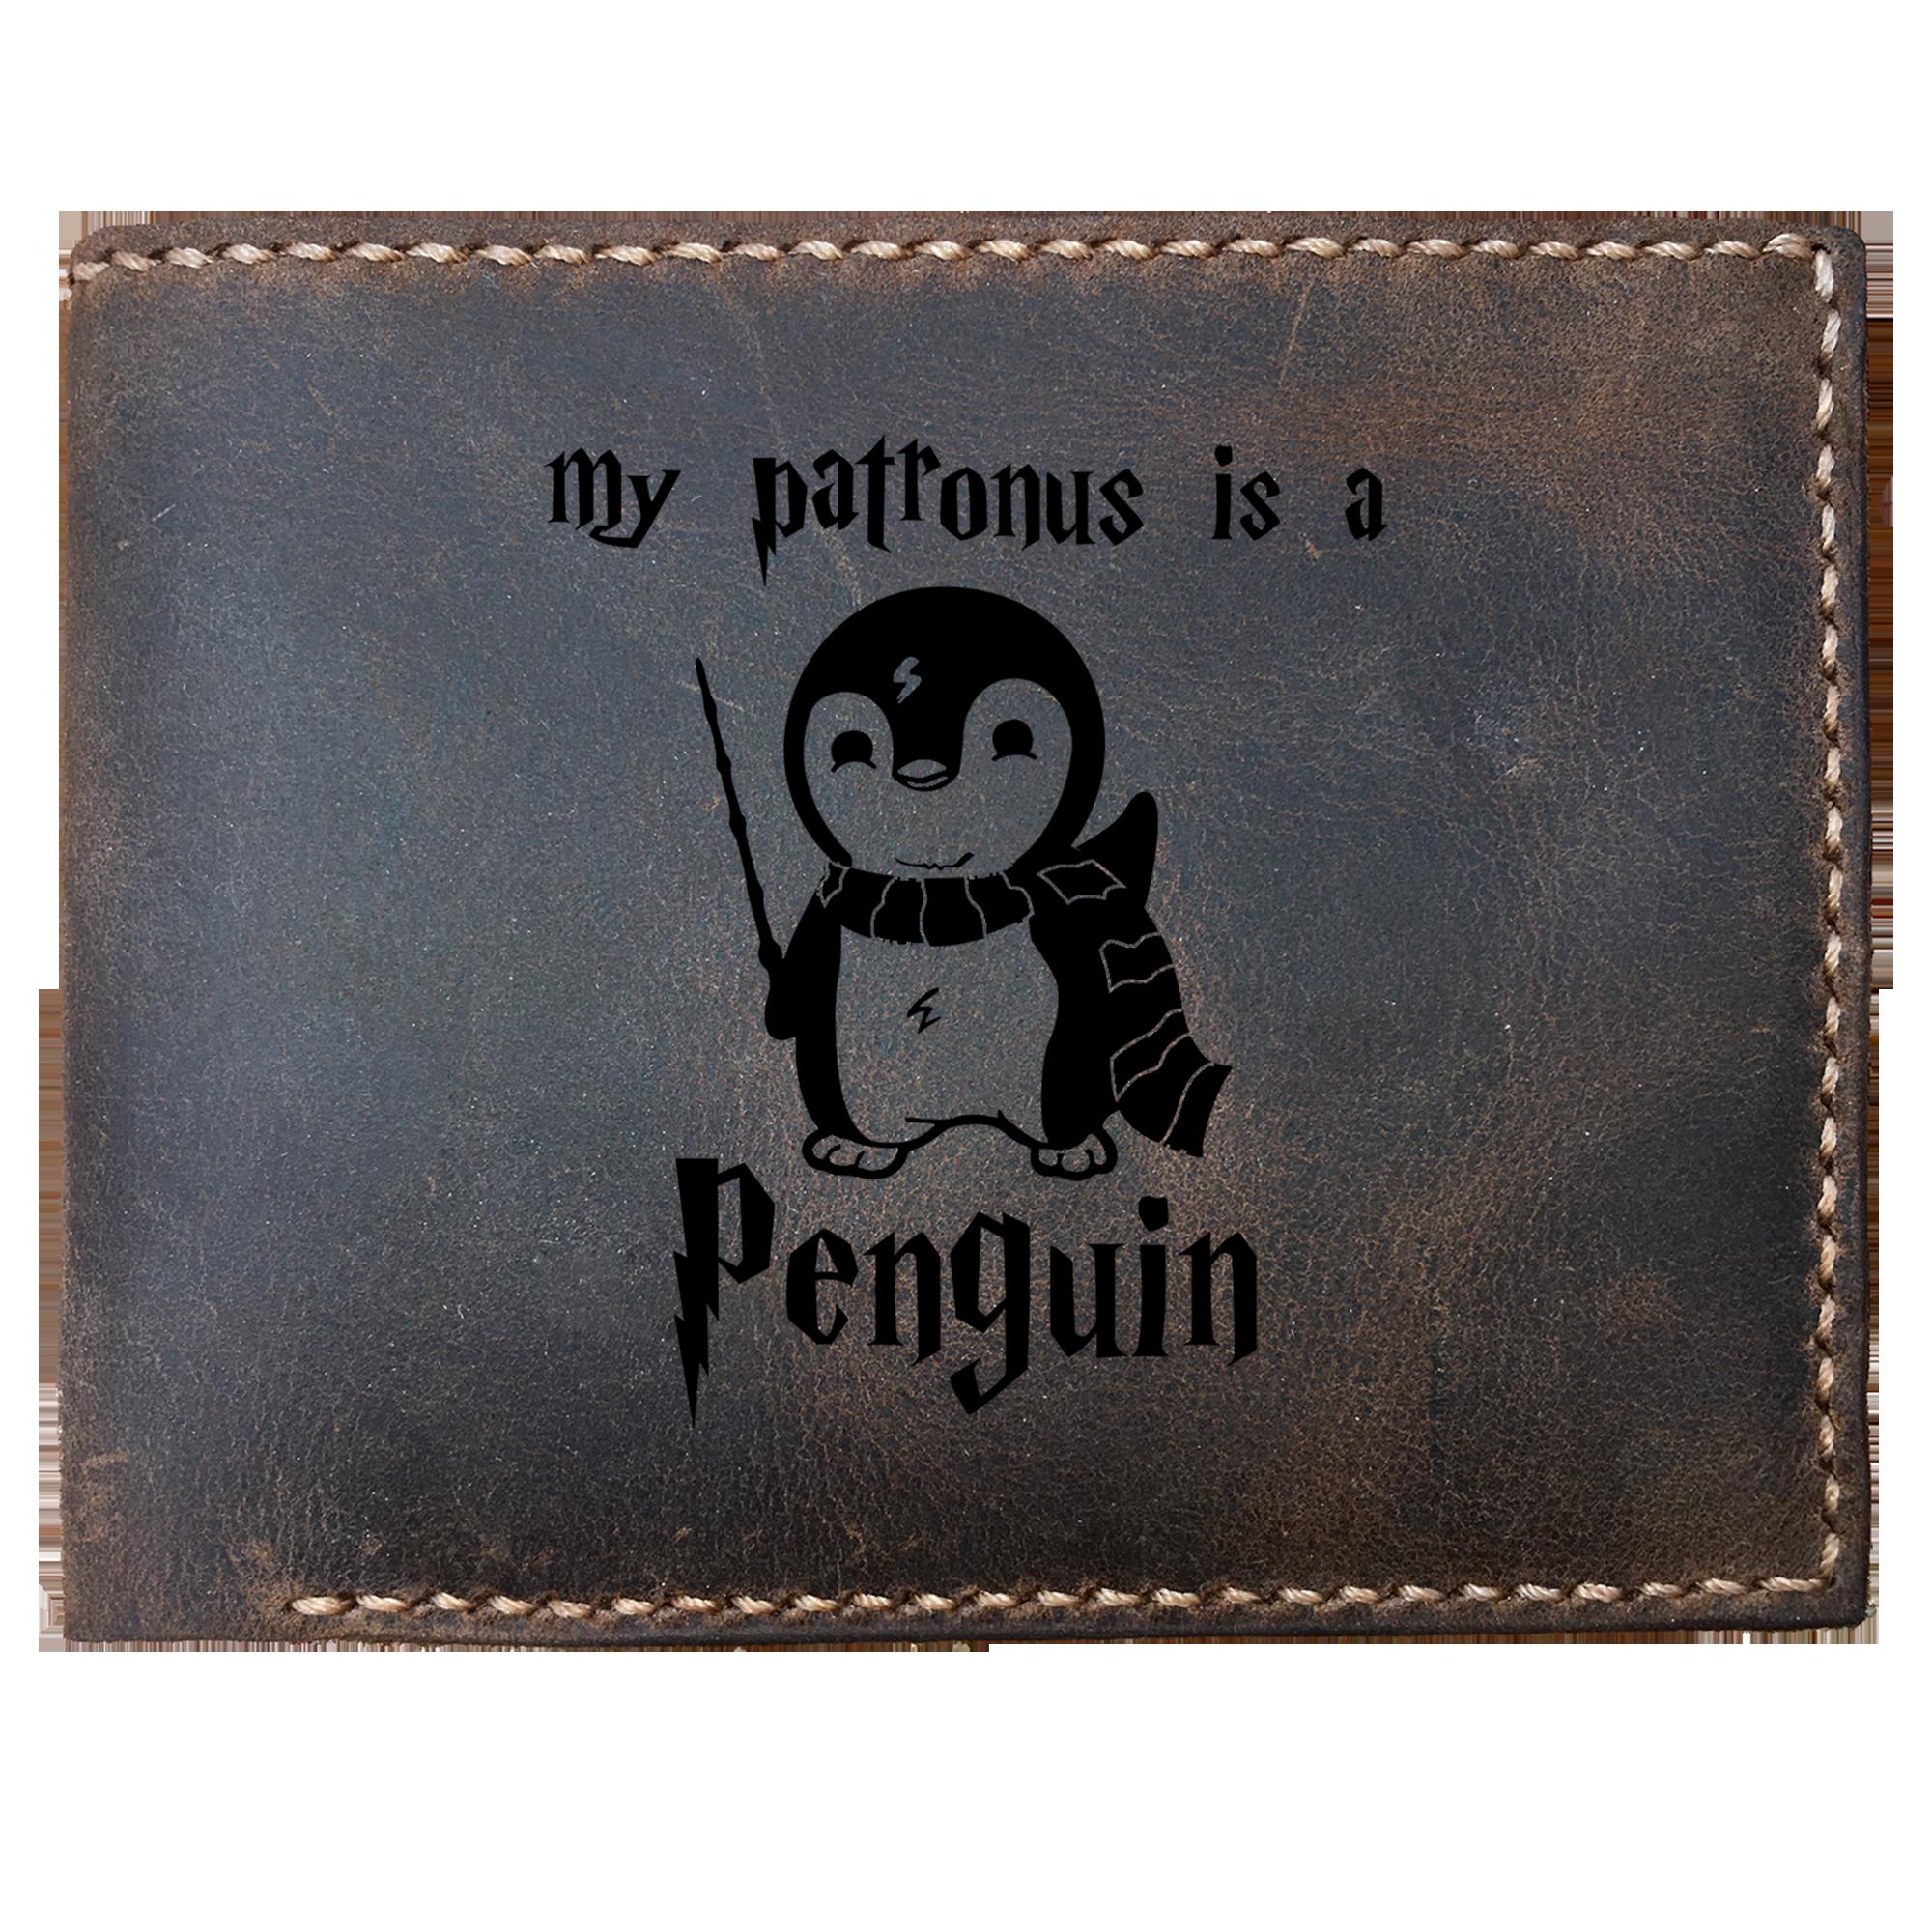 Skitongifts Funny Custom Laser Engraved Bifold Leather Wallet For Men, My Patronus Is A Penguin